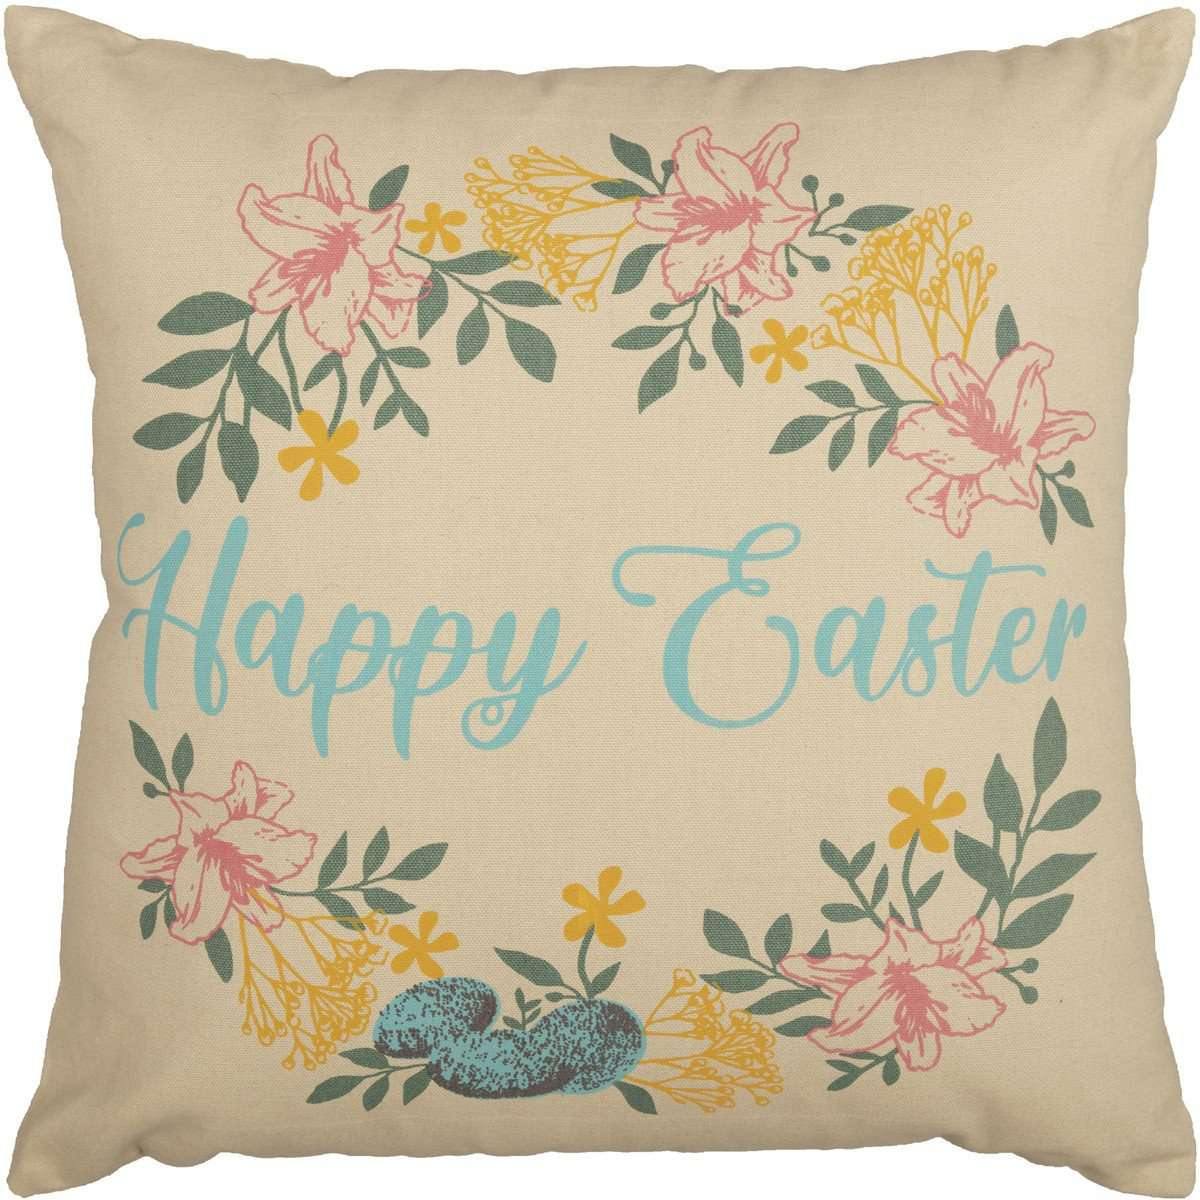 Sawyer Mill Happy Easter Wreath Pillow 18x18 VHC Brands front